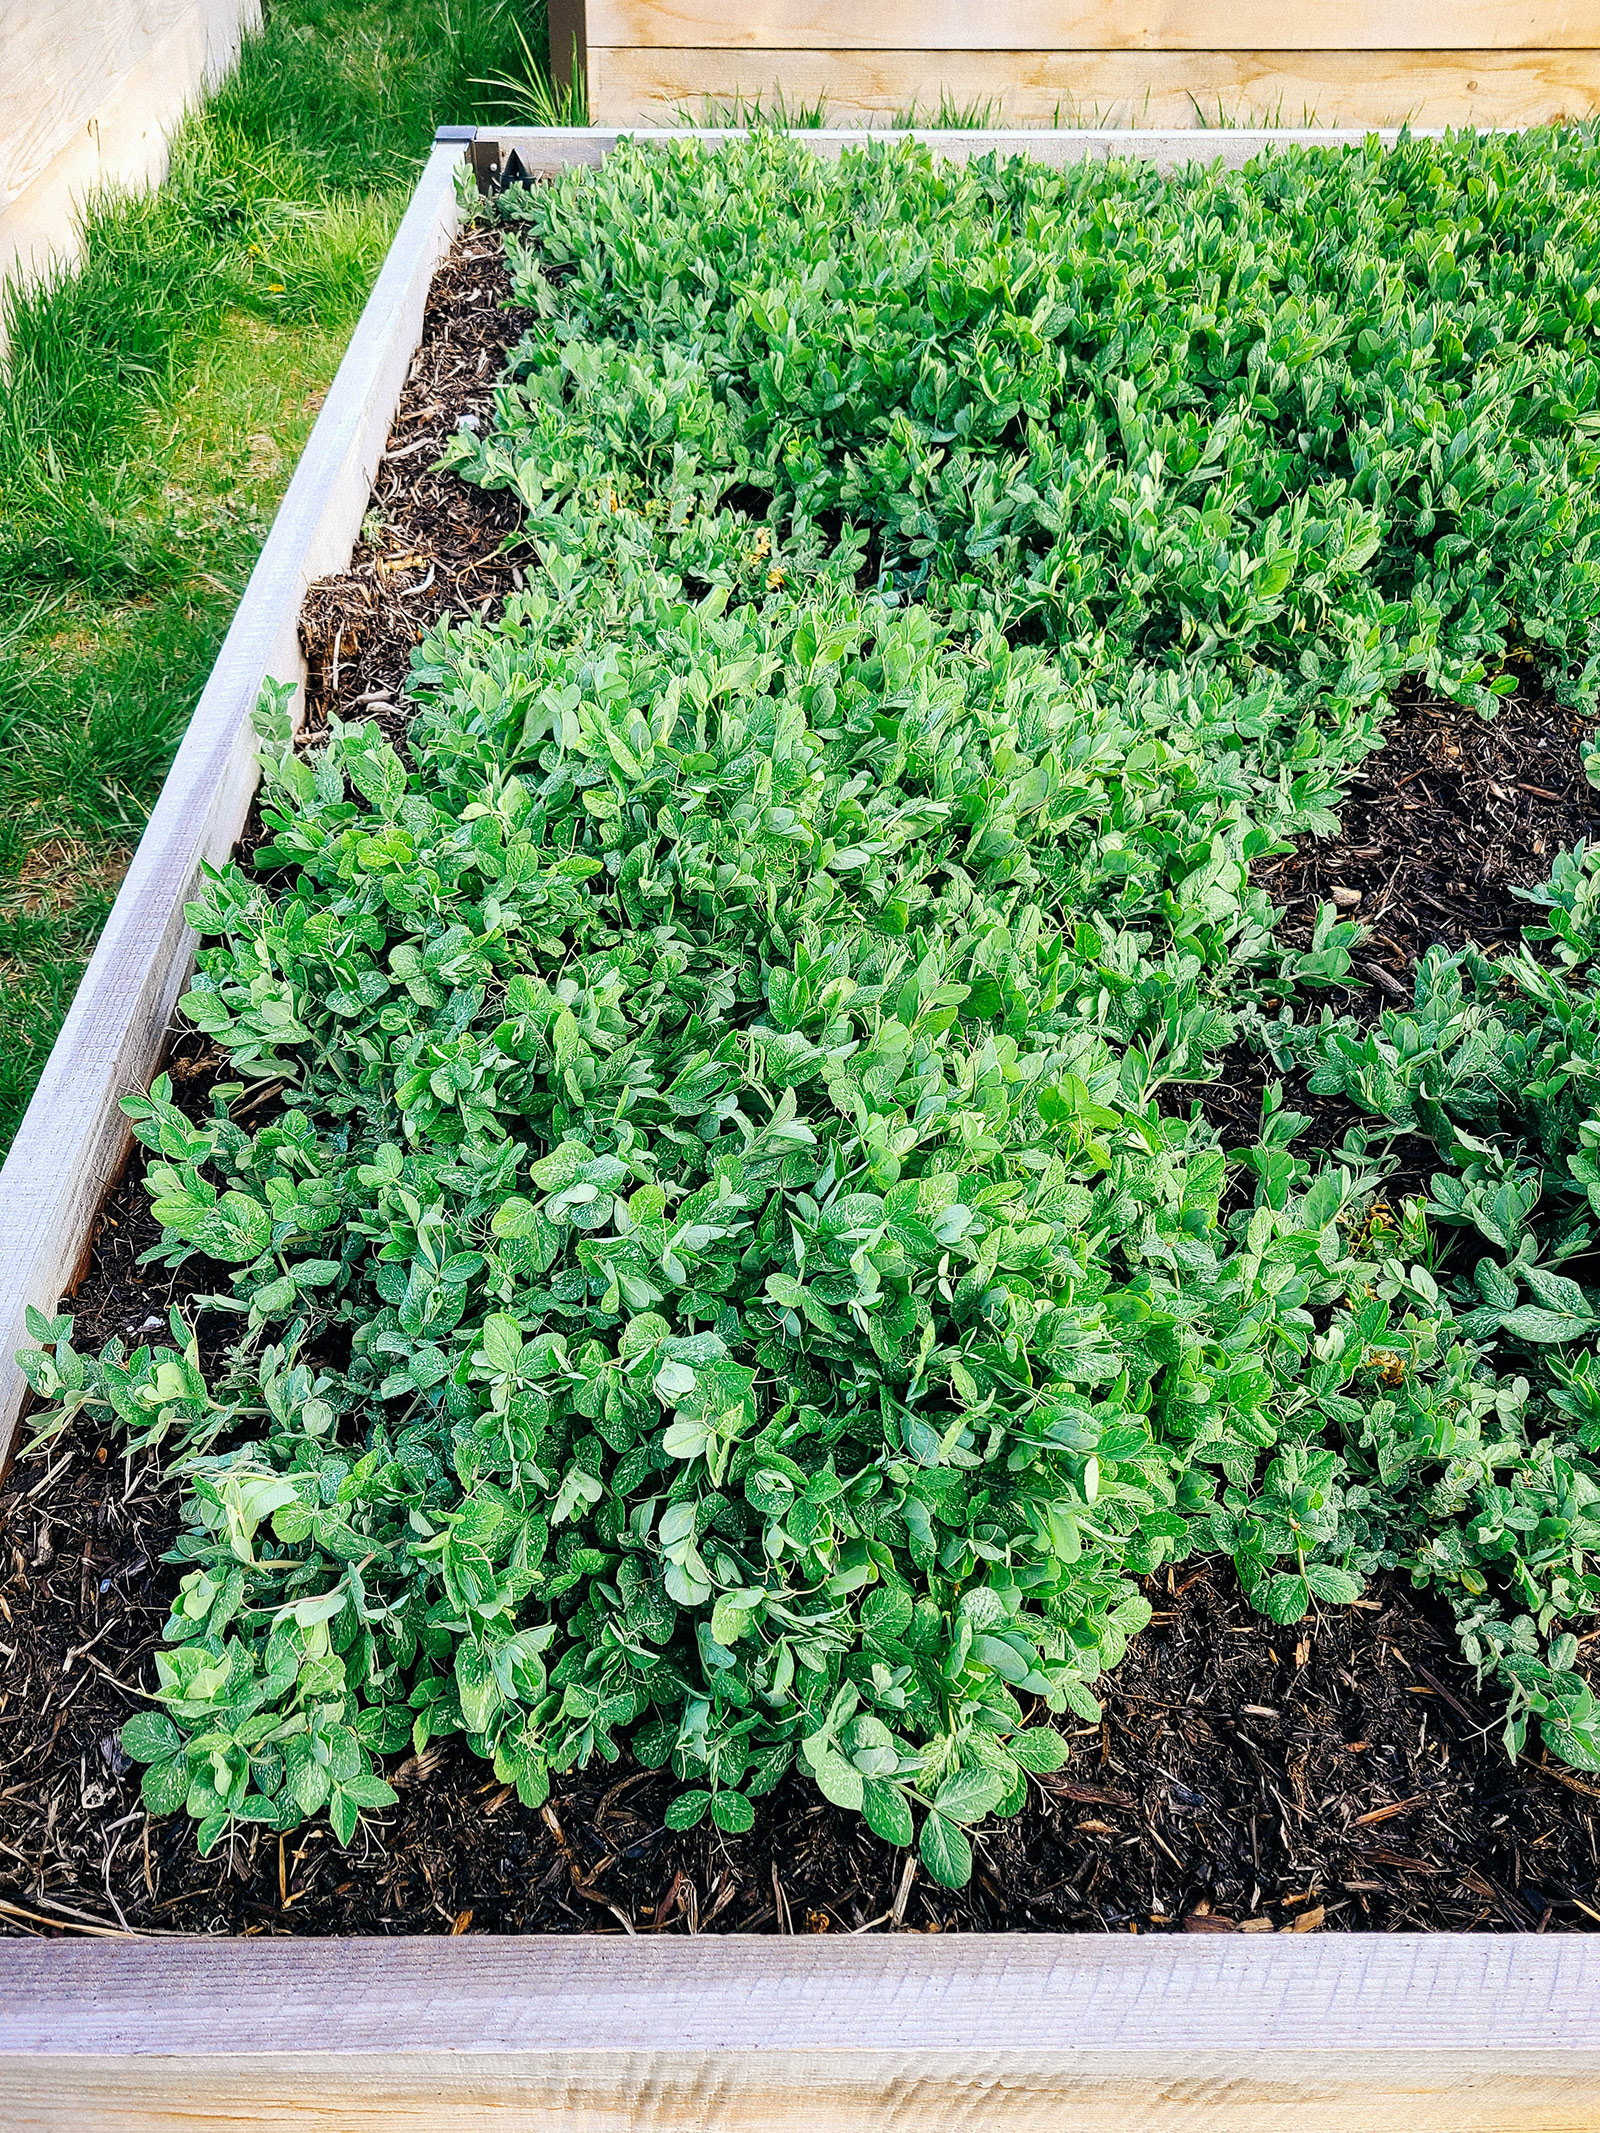 Cover cropping the easy way: how to grow field peas for fertilizer